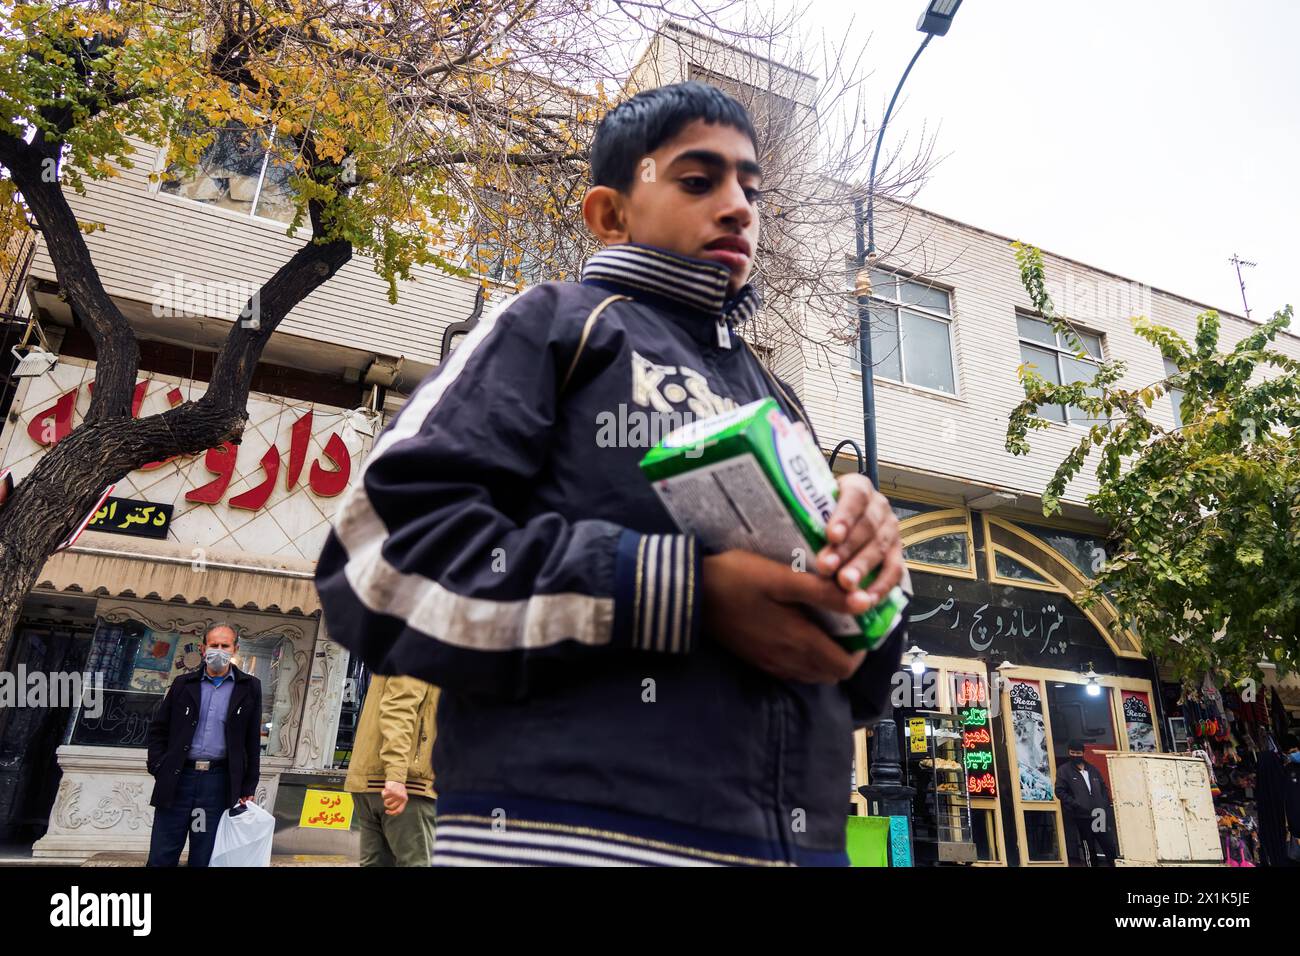 Shiraz, Iran- December 31, 2022: The people of Iran. An Afghan immigrant teenager sells imported chewing gum on the street. Westernization. A preferen Stock Photo